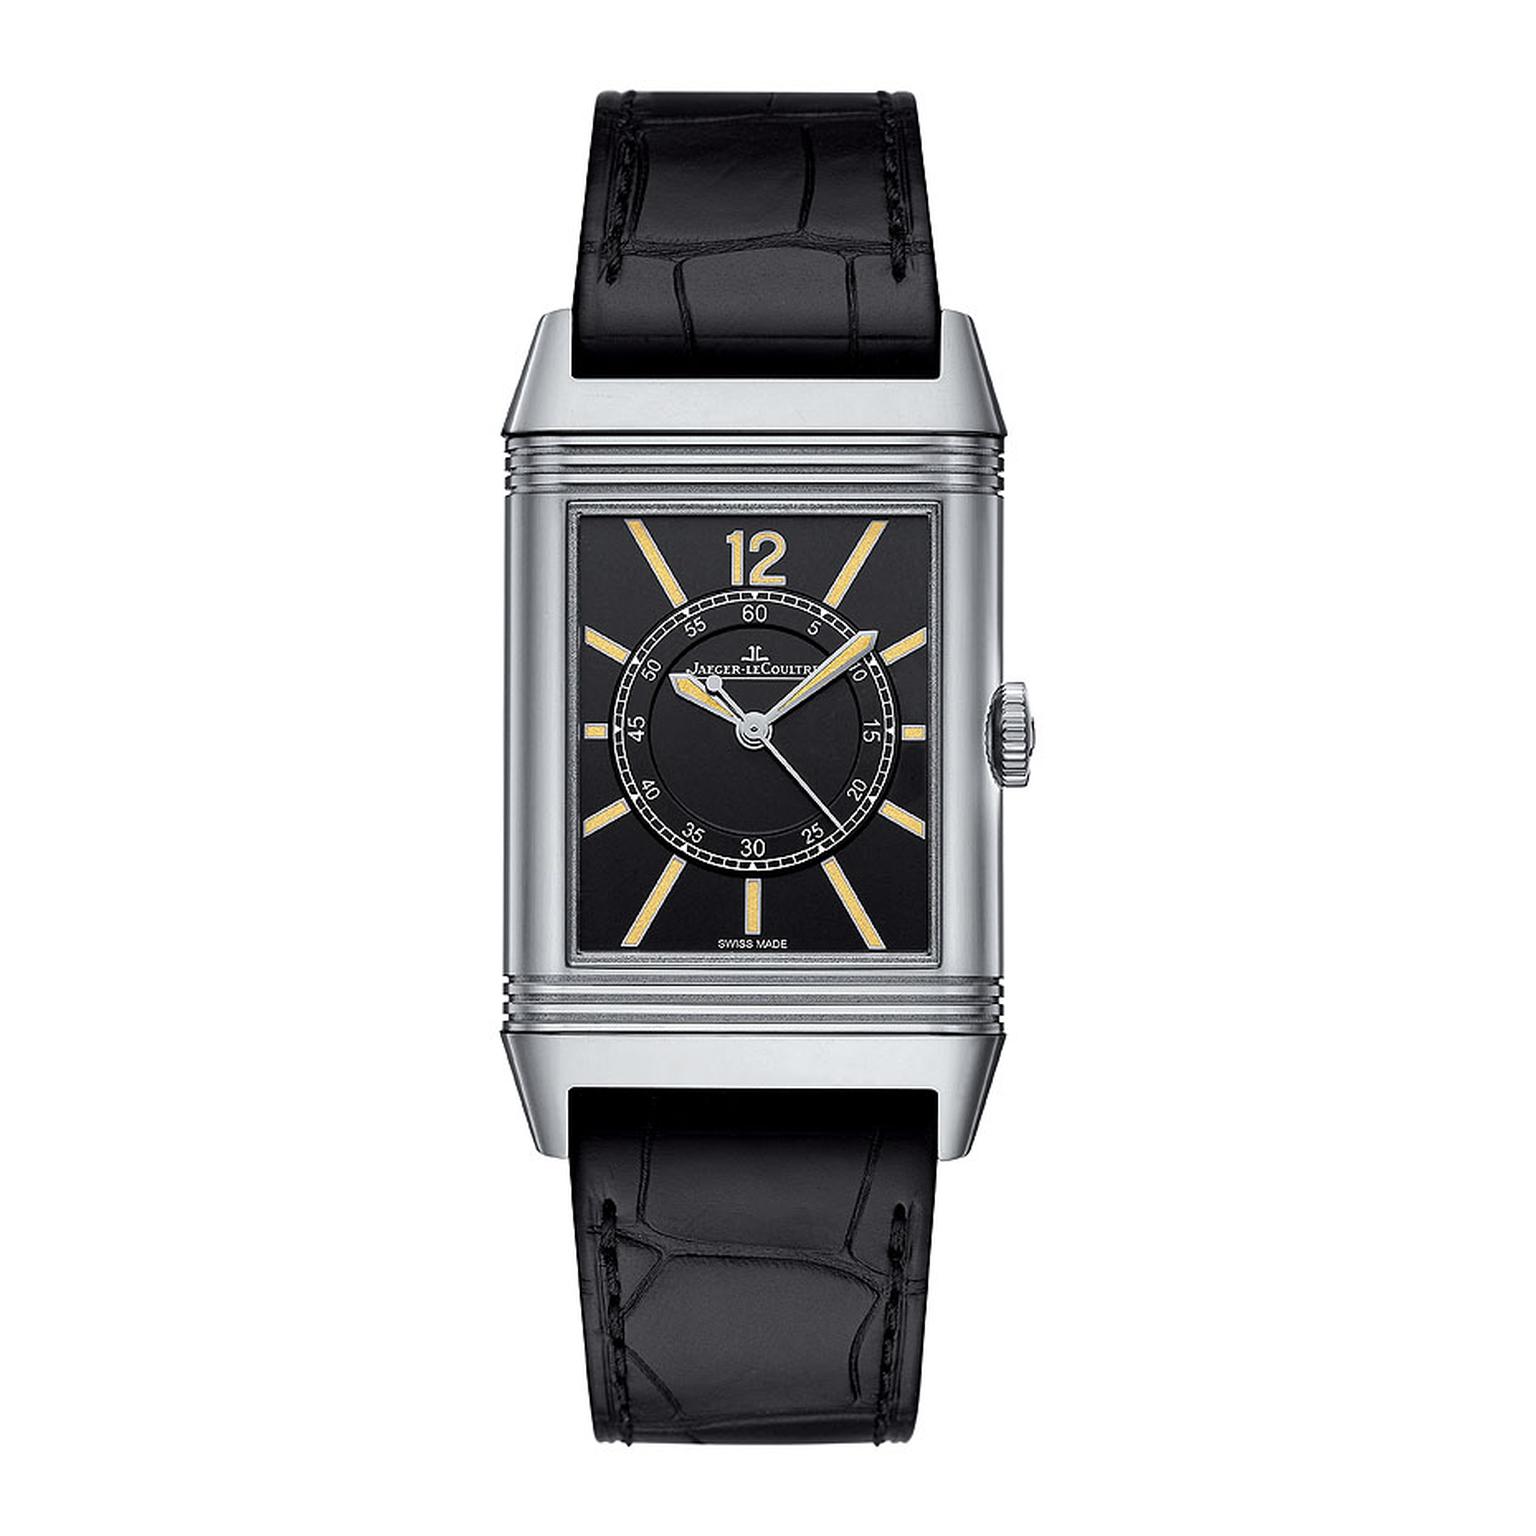 The limited Boutique Edition Jaeger-LeCoultre Grande Reverso 1931 Seconde Centrale watch features a 46.8 x 27.4mm white gold case and is presented on a black alligator strap with a white gold pin buckle. The black dial houses gold-powdered hour makers and